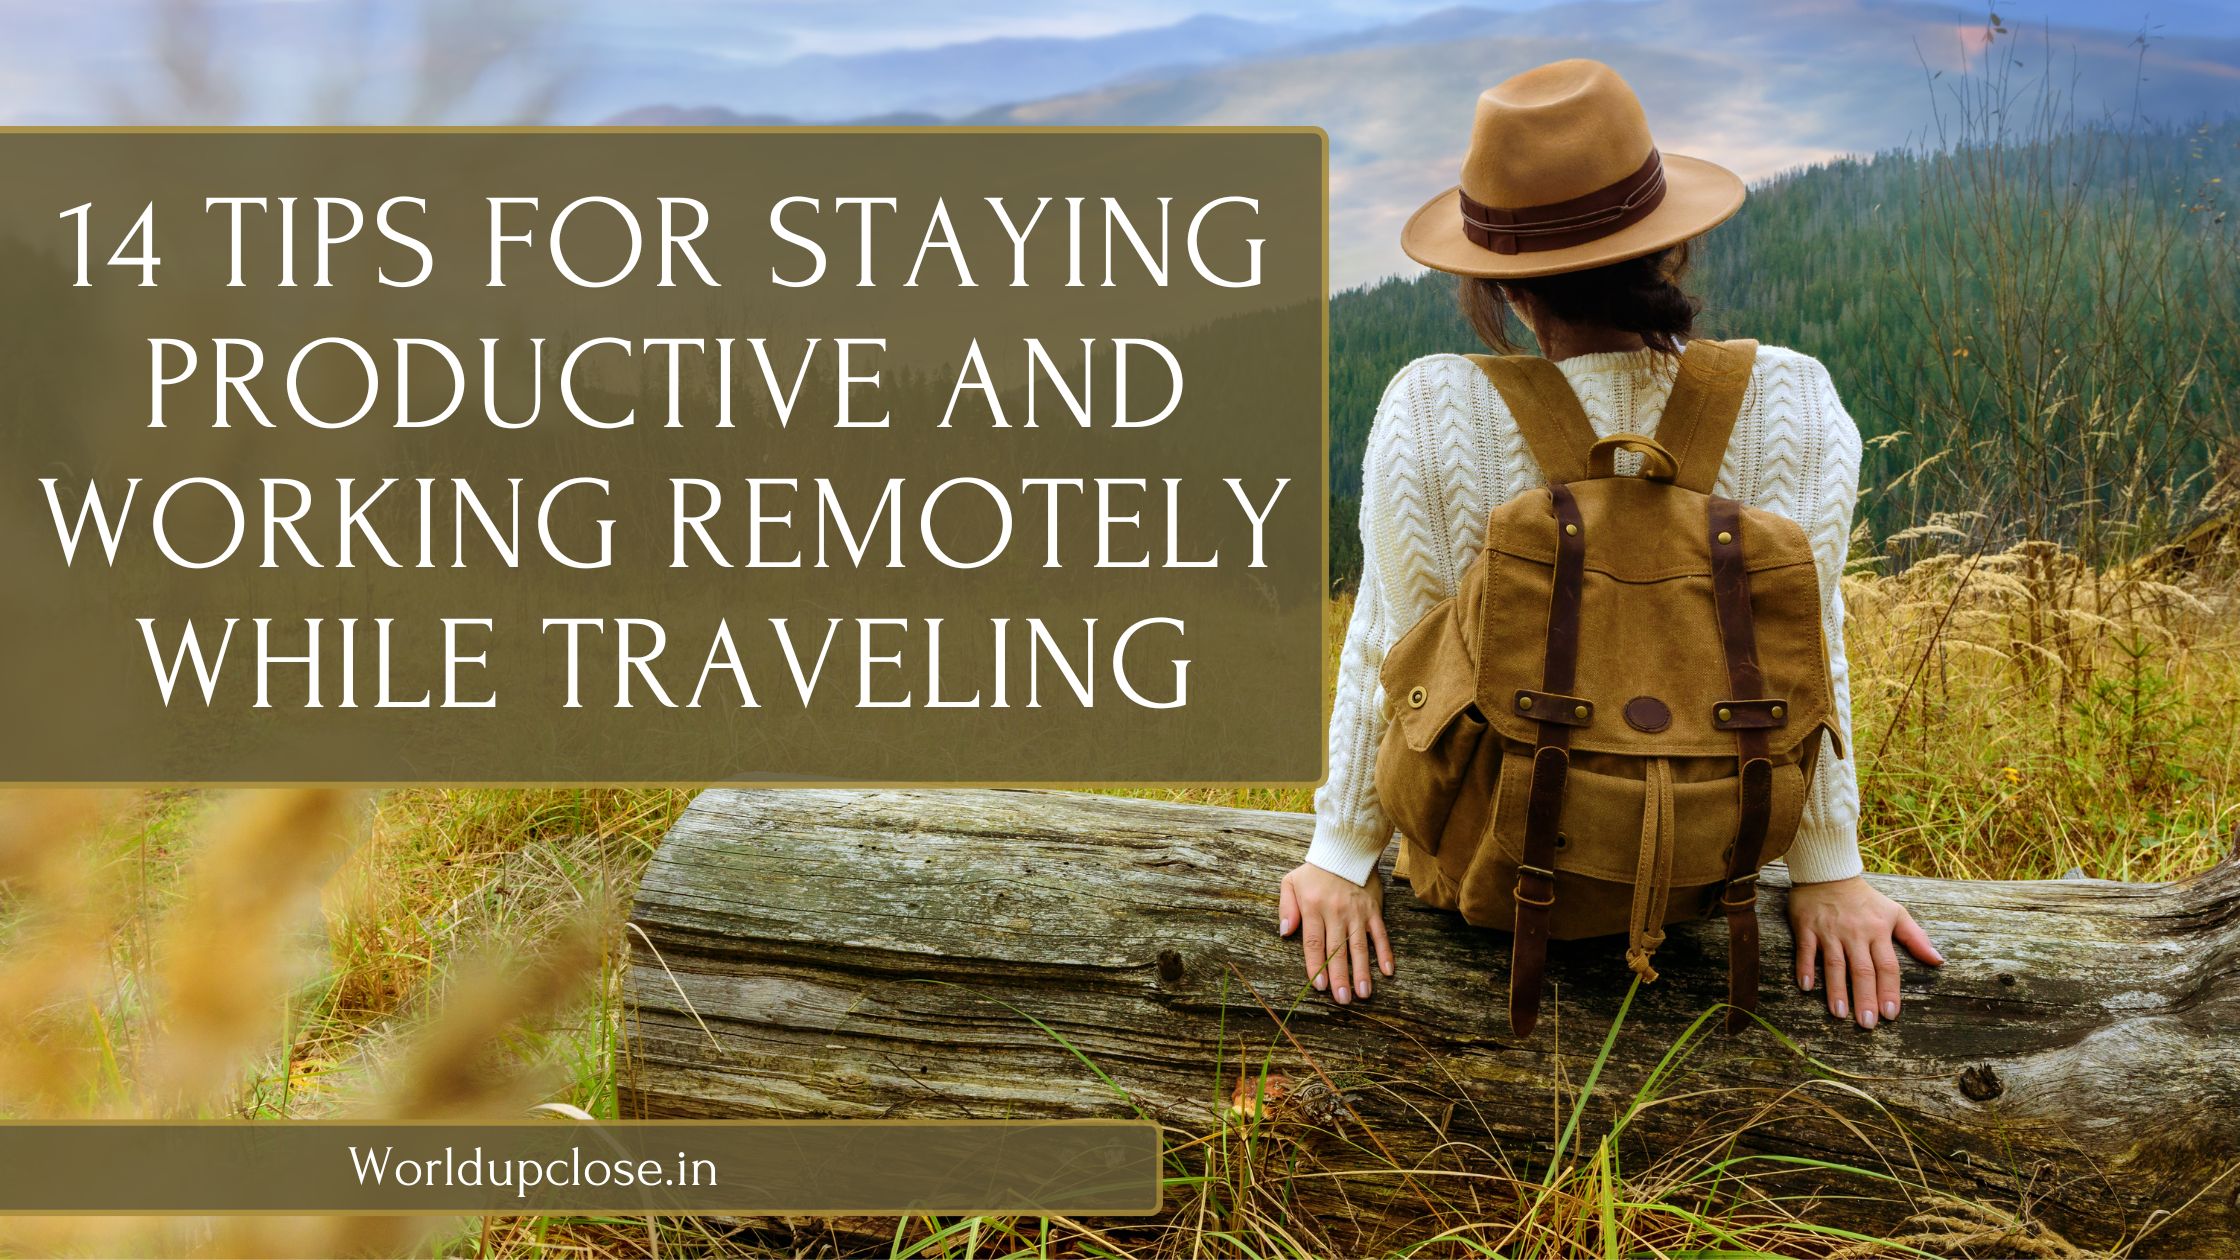 14 Tips for staying productive and working remotely while traveling 4